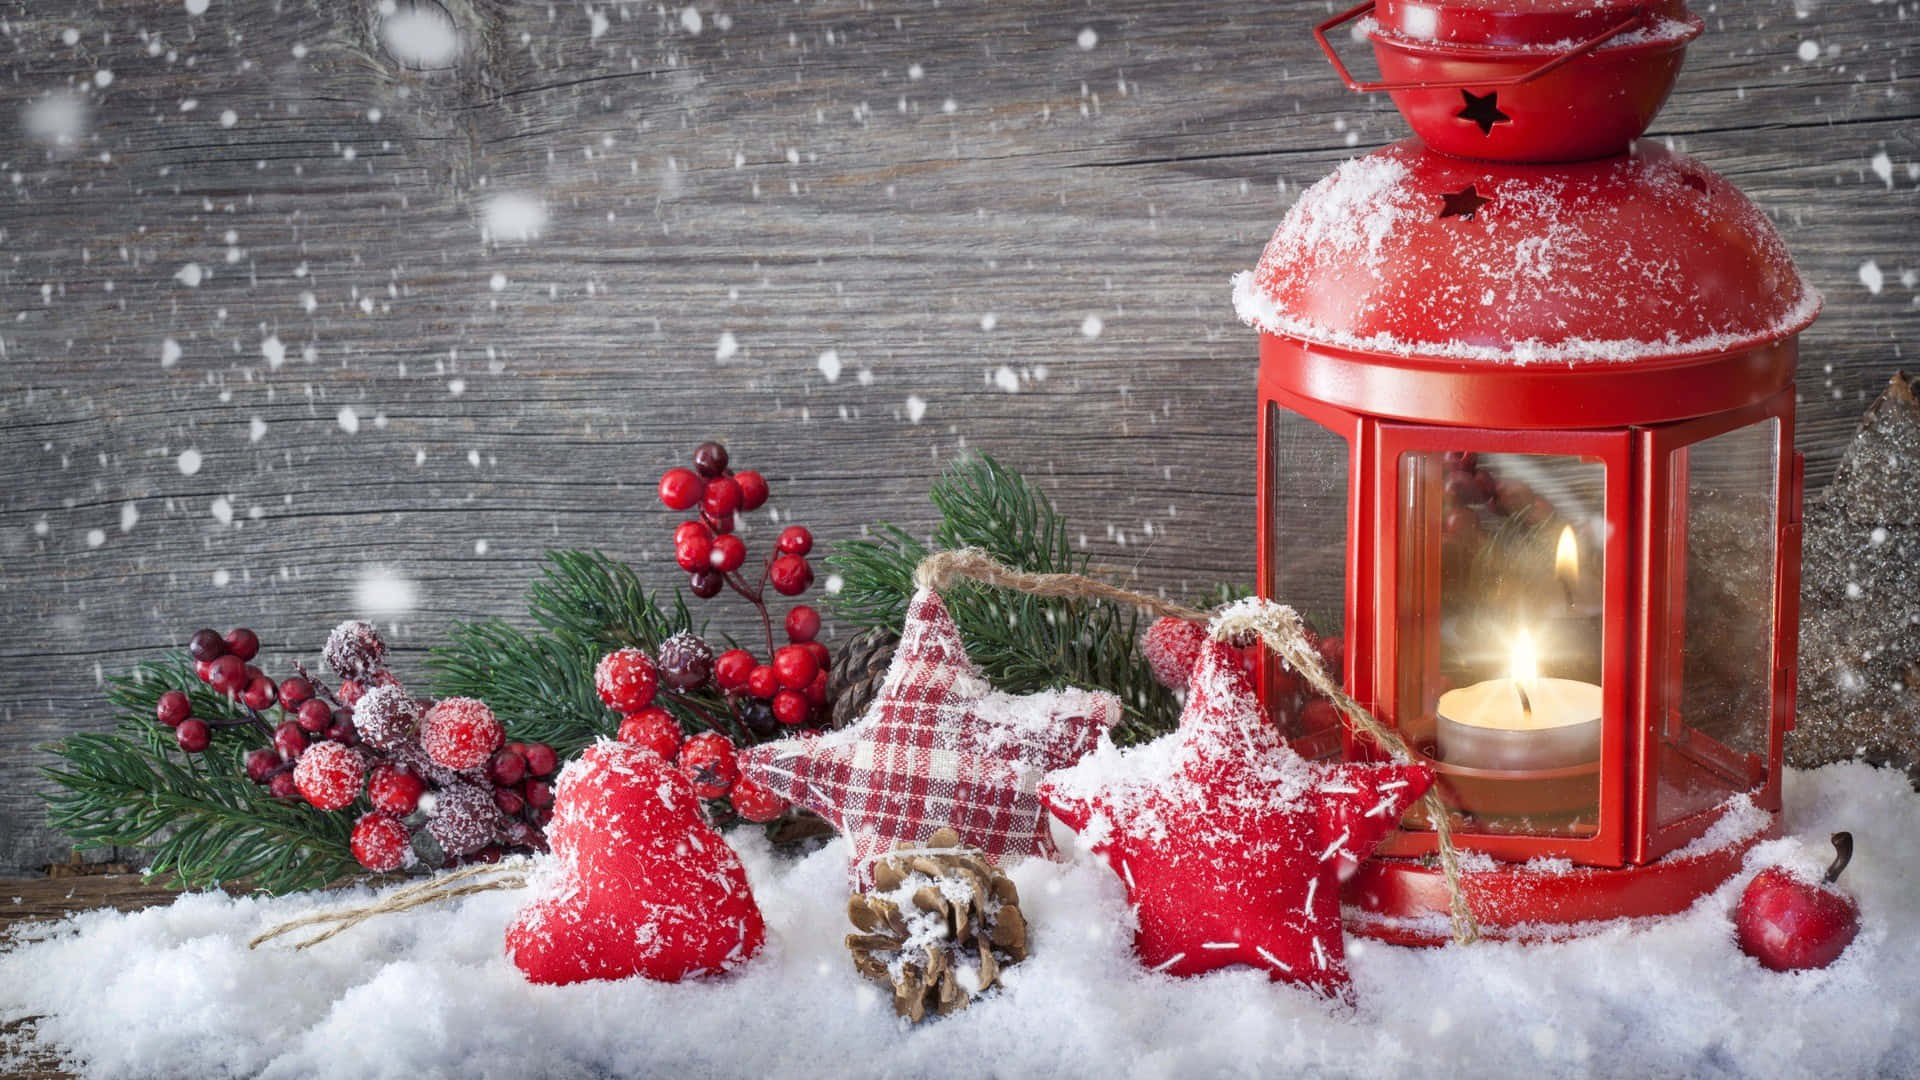 Feel the warmth of the Christmas season with this festive desktop background!